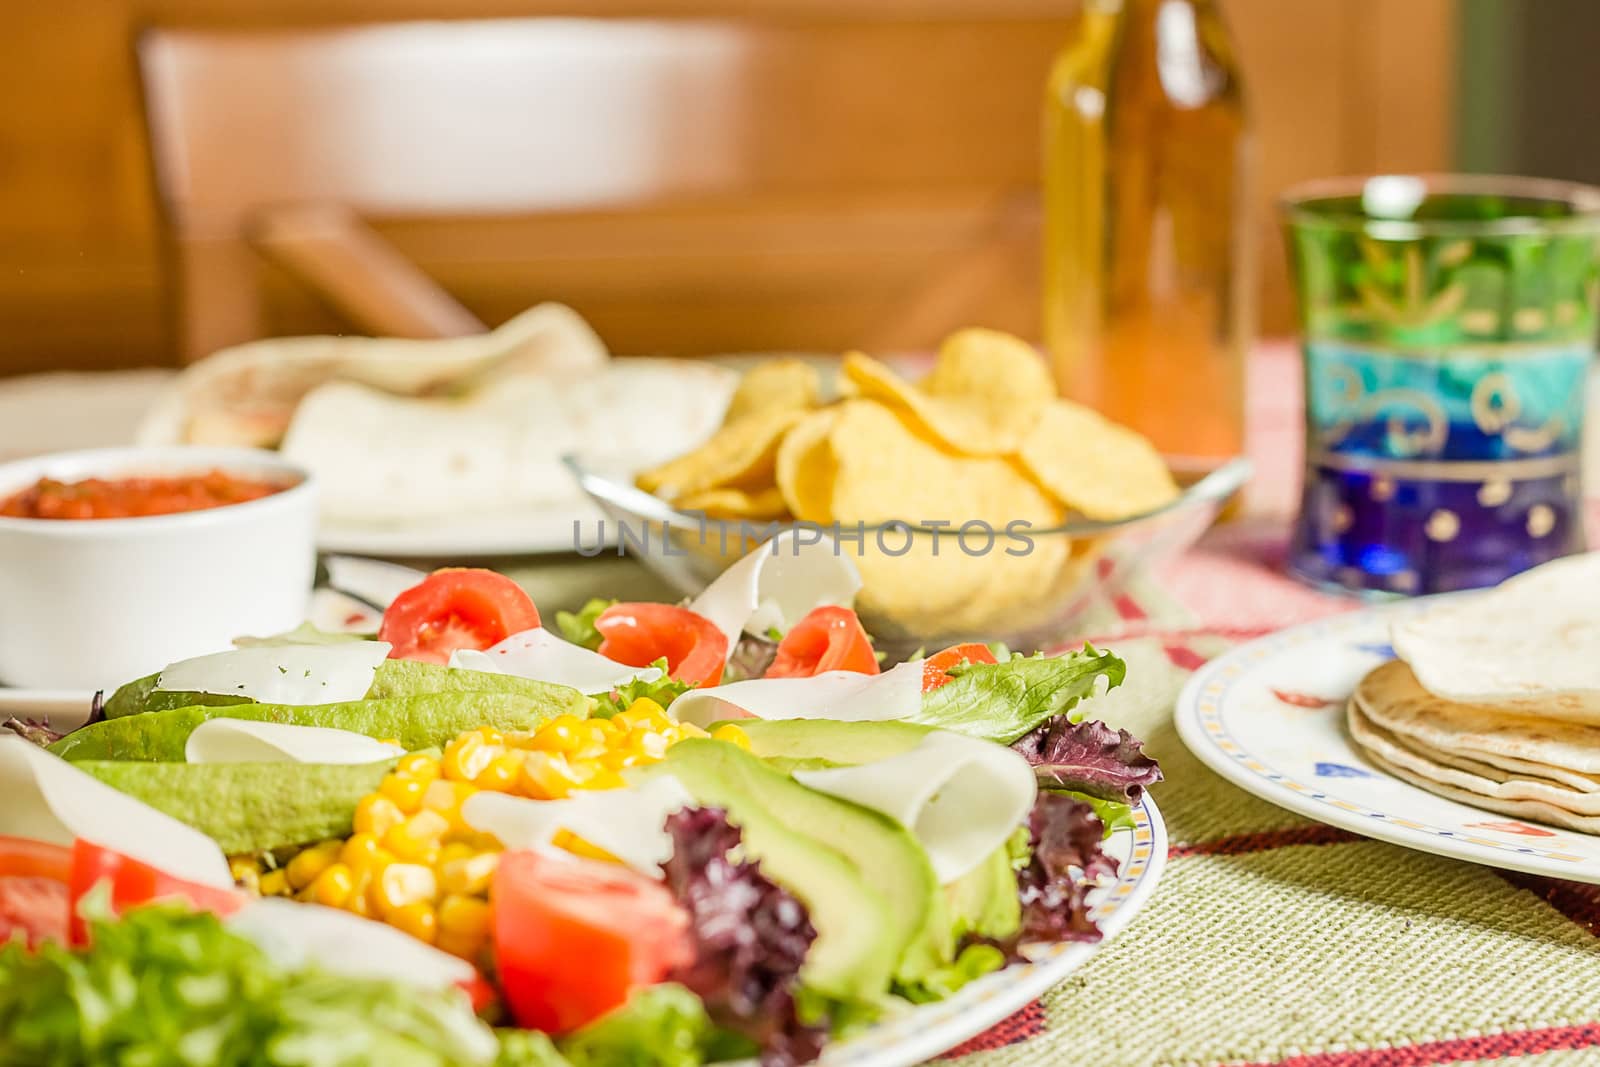 Closeup of traditional mexican food in a table, with a plate of fresh salad, tortillas, chicken fajitas, nachos and a bowl of spicy sauce